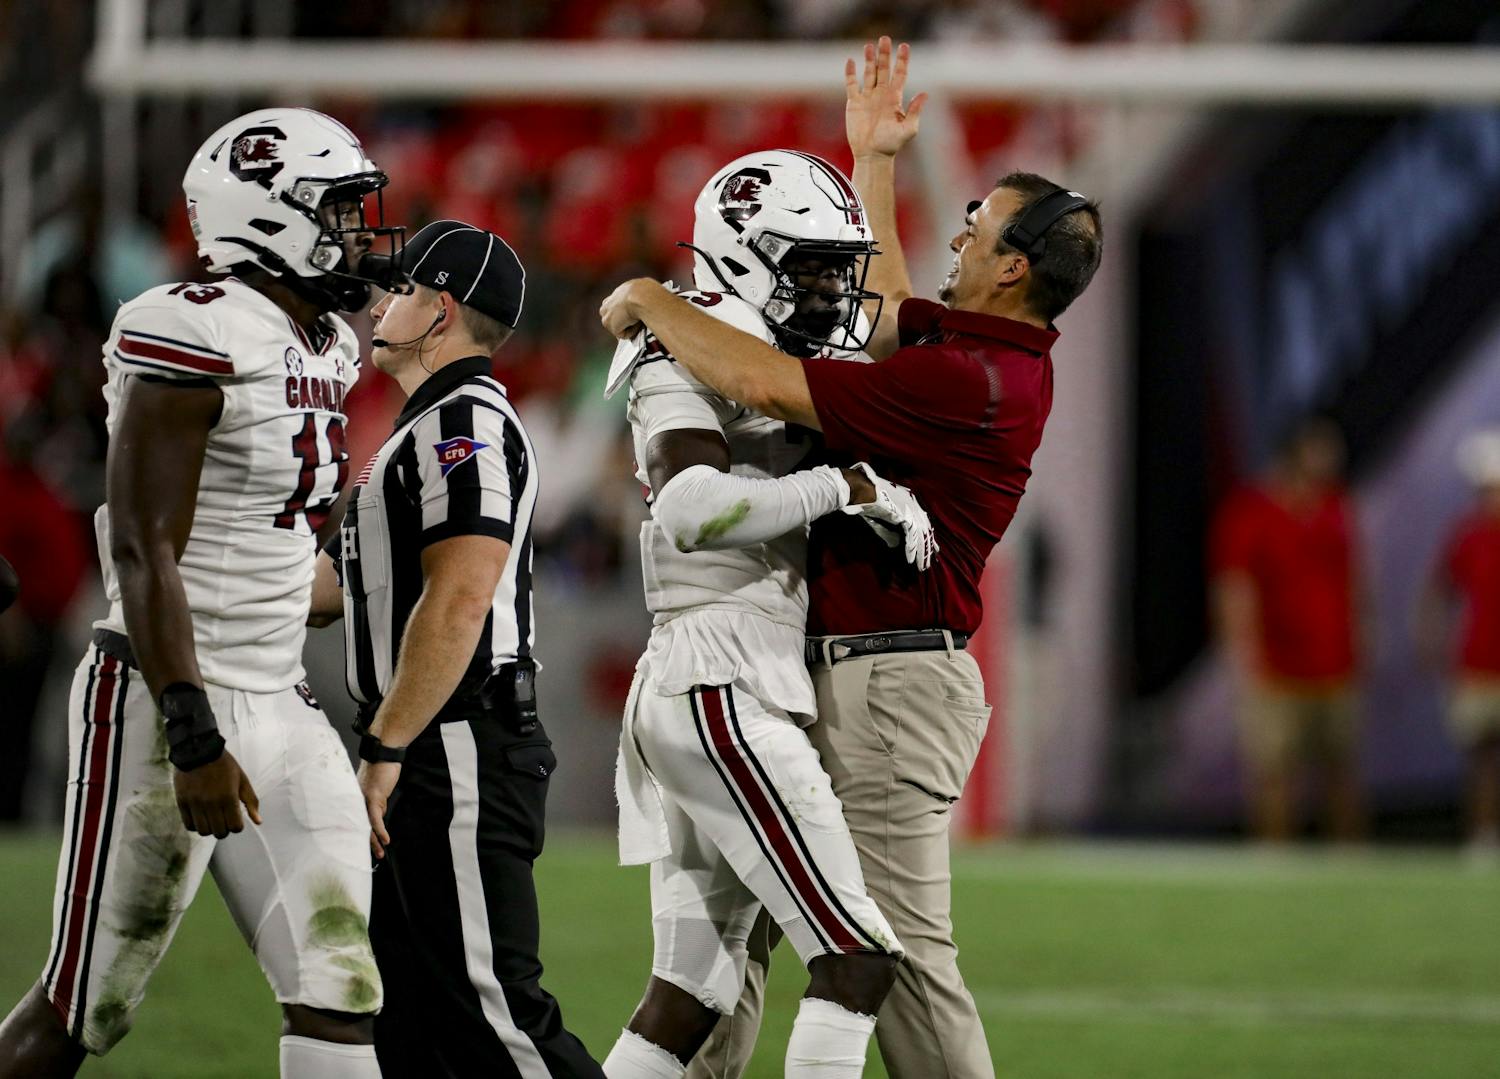 Head coach Shane Beamer celebrates a defensive stop by redshirt freshman defensive back O'Donnell Fortune in South Carolina's game against Georgia on Sept. 18, 2021.